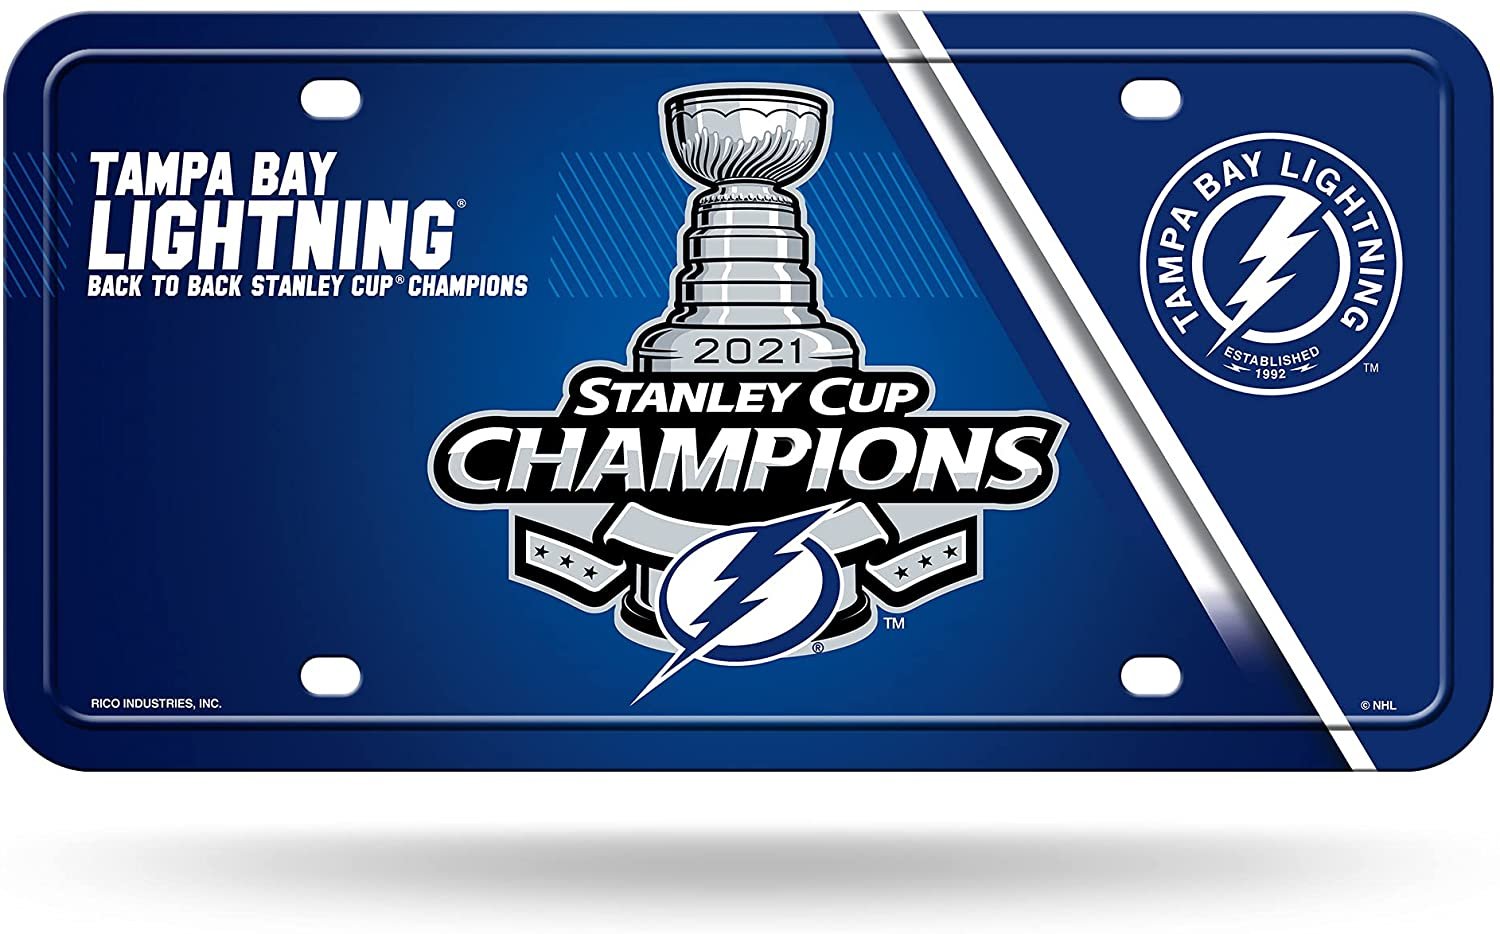 Tampa Bay Lightning Metal Auto Tag License Plate, 2021 Stanley Cup Champions, 6x12 Inch